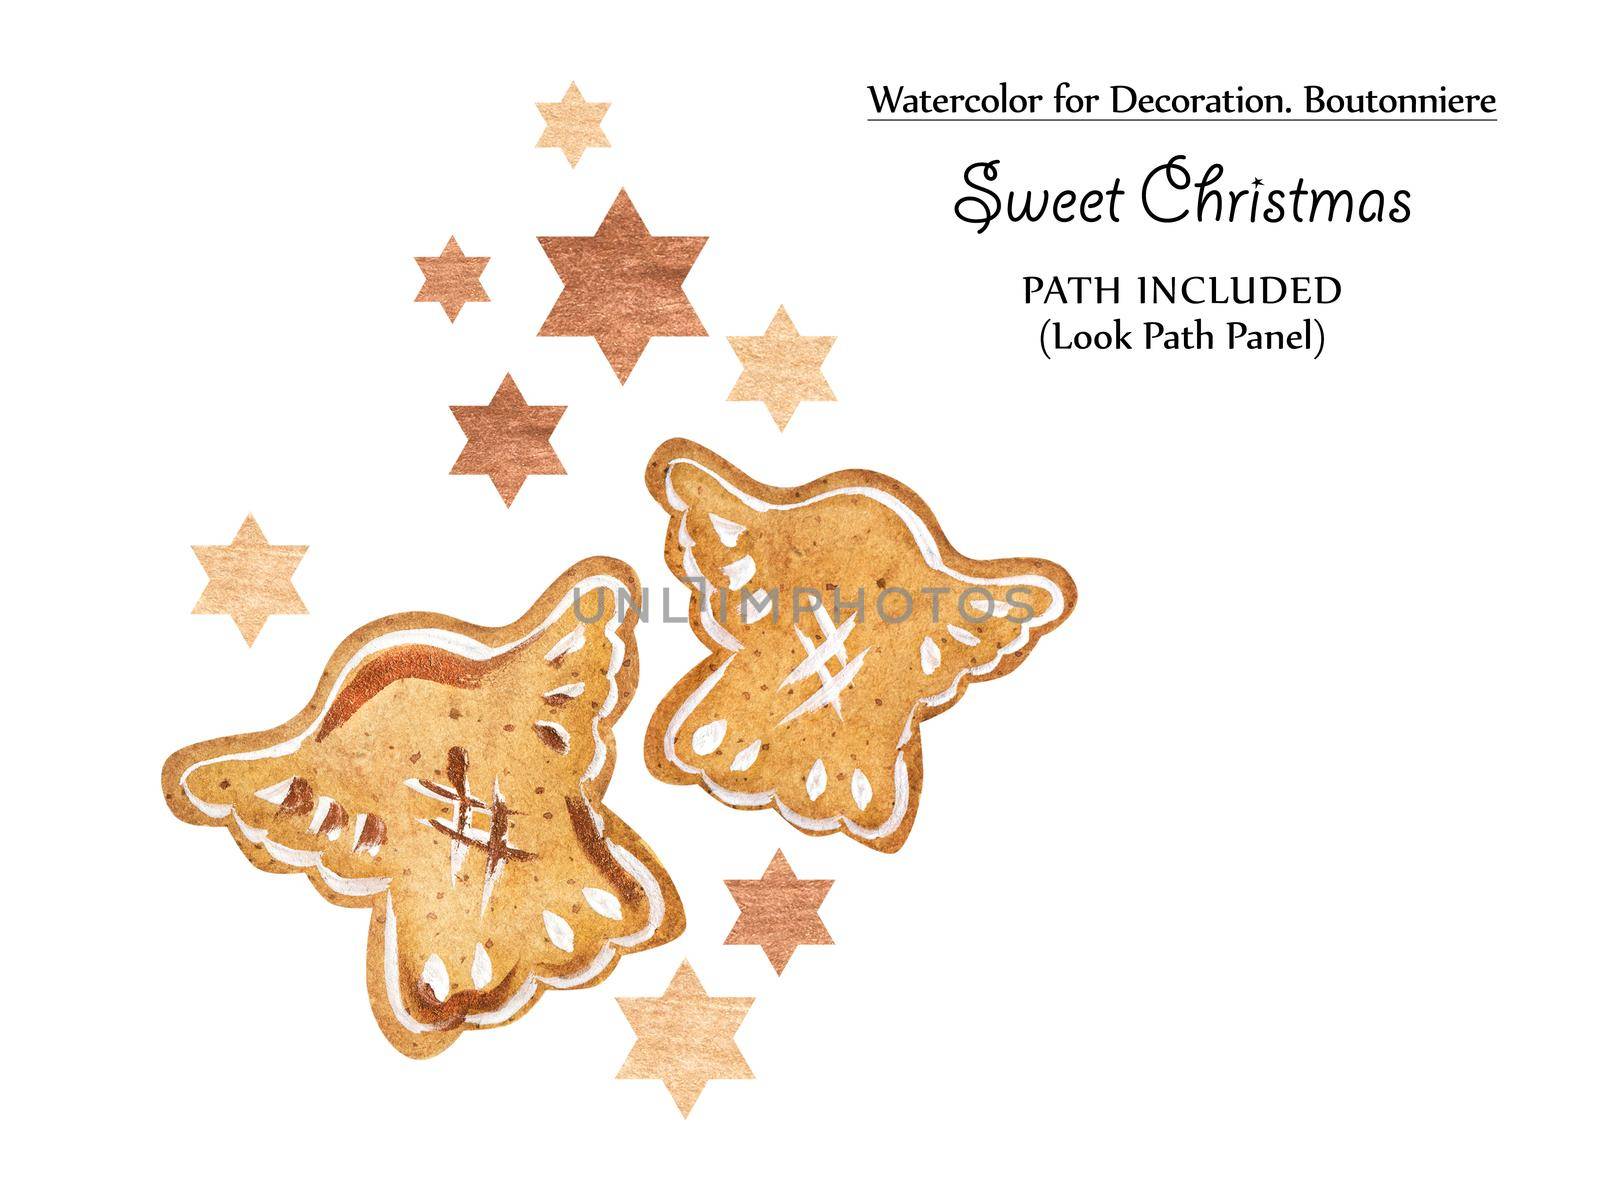 Sweet vignettes with gingerbreads and golden stars by Xeniasnowstorm